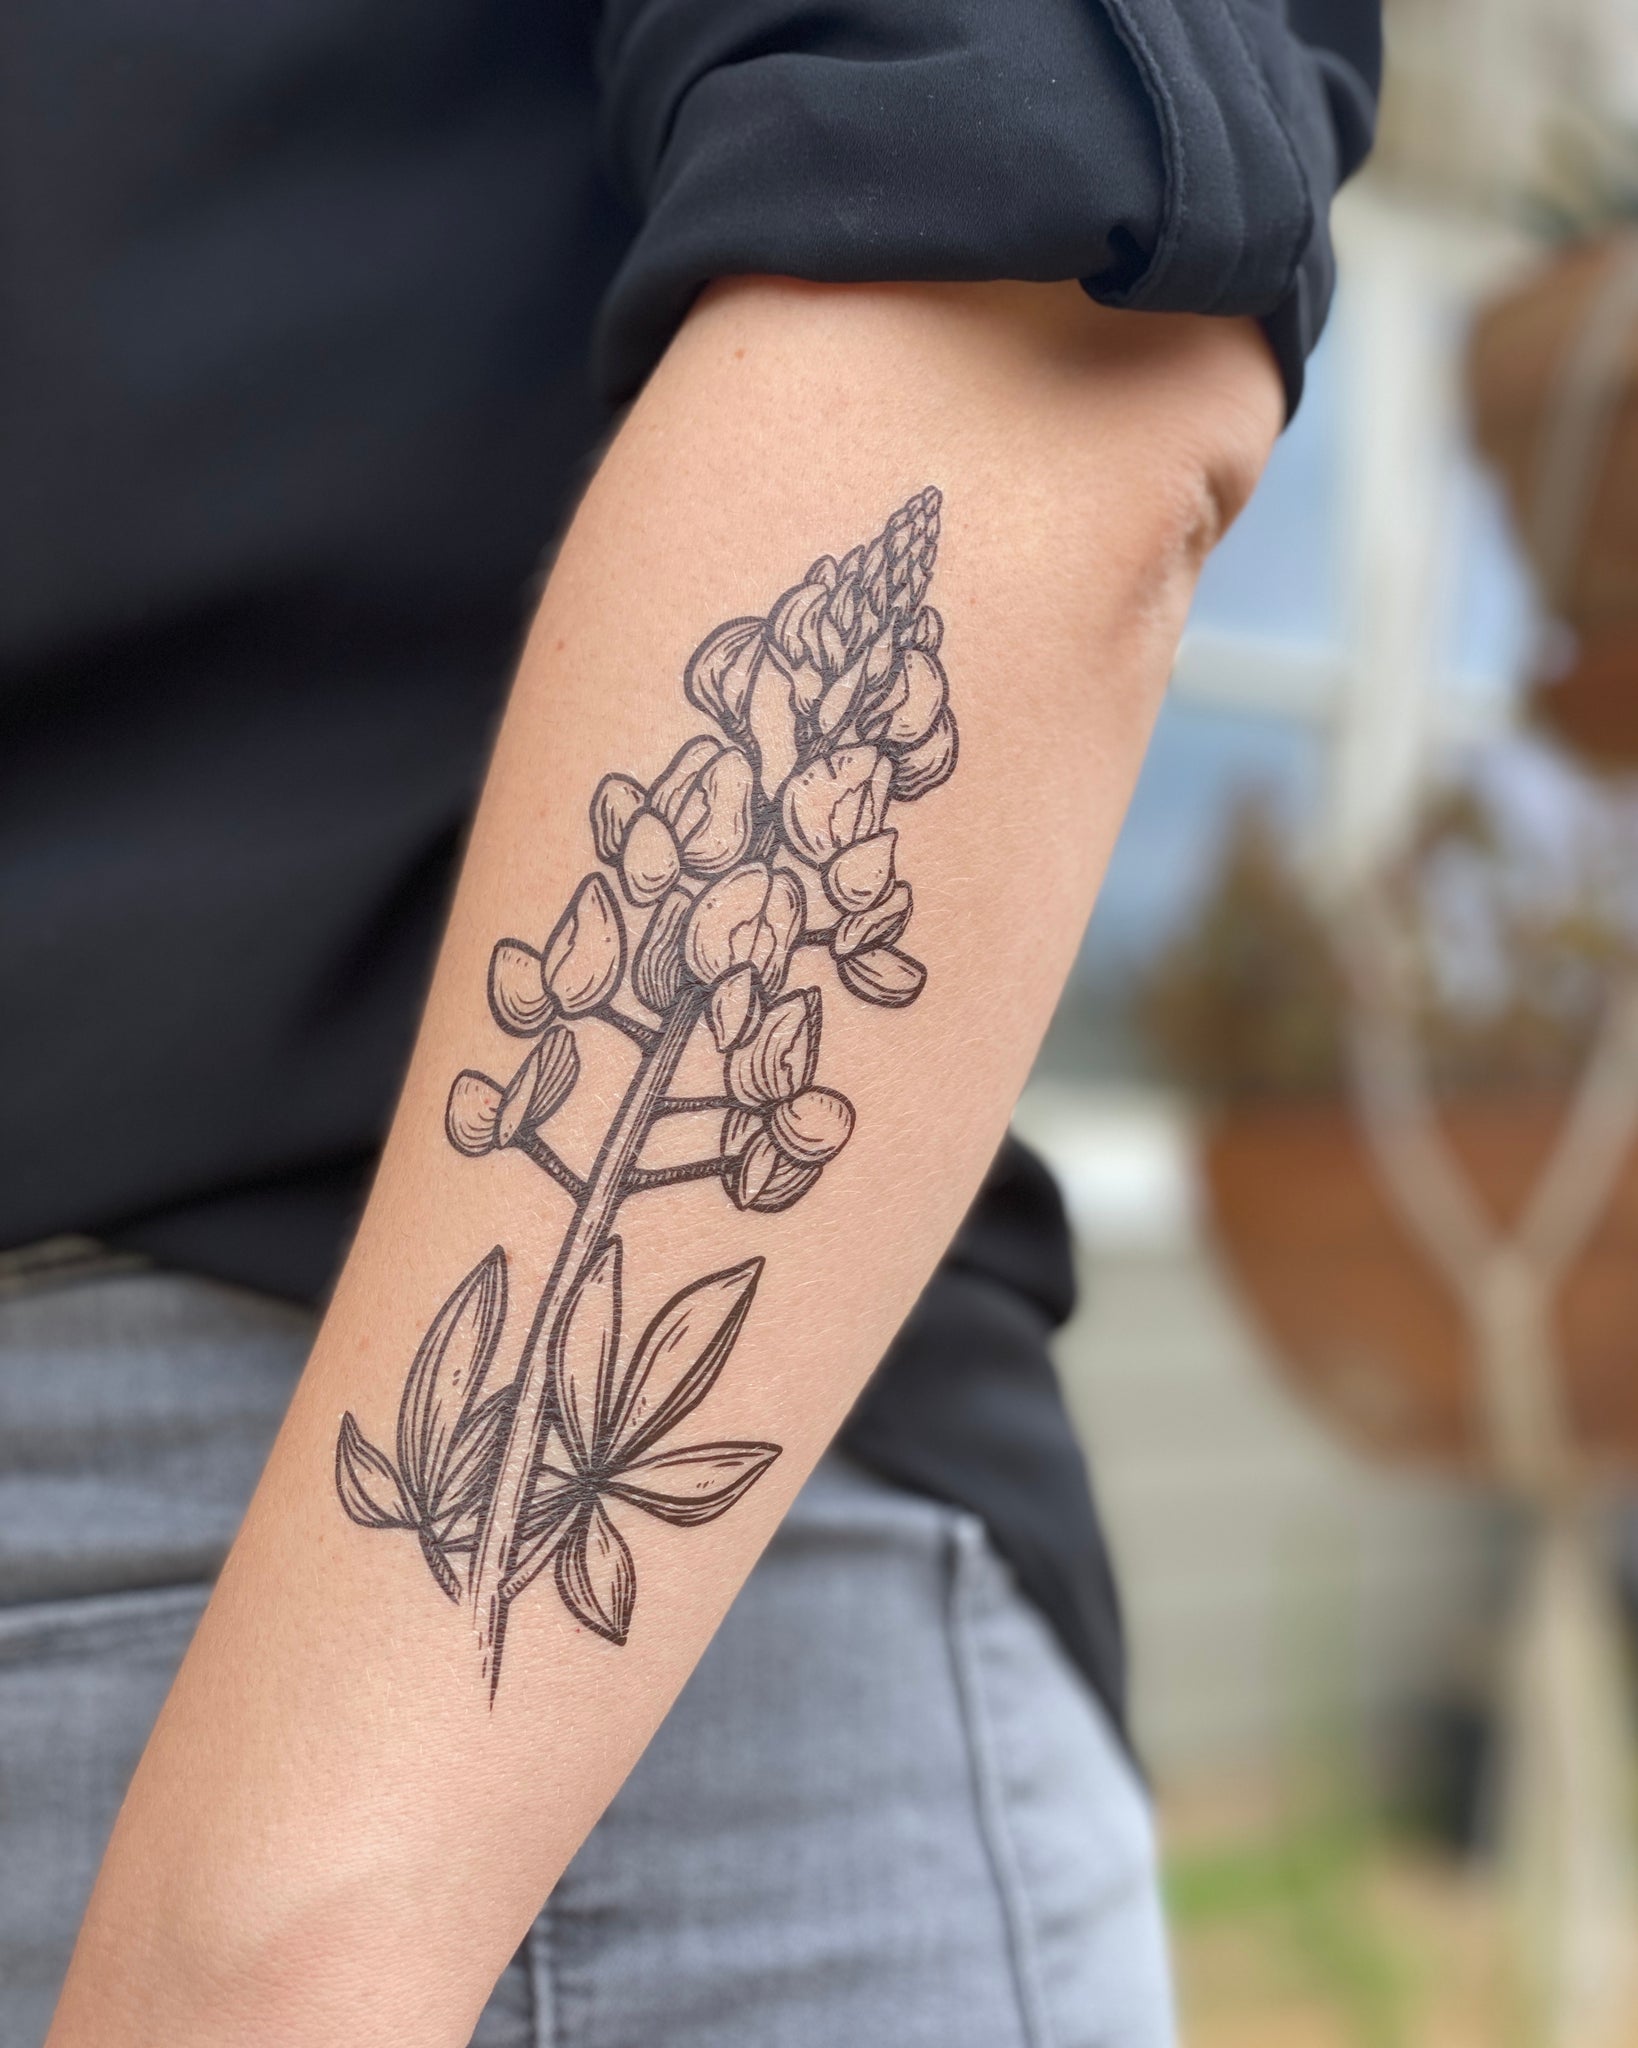 11 Texas Sleeve Tattoo Ideas That Will Blow Your Mind  alexie